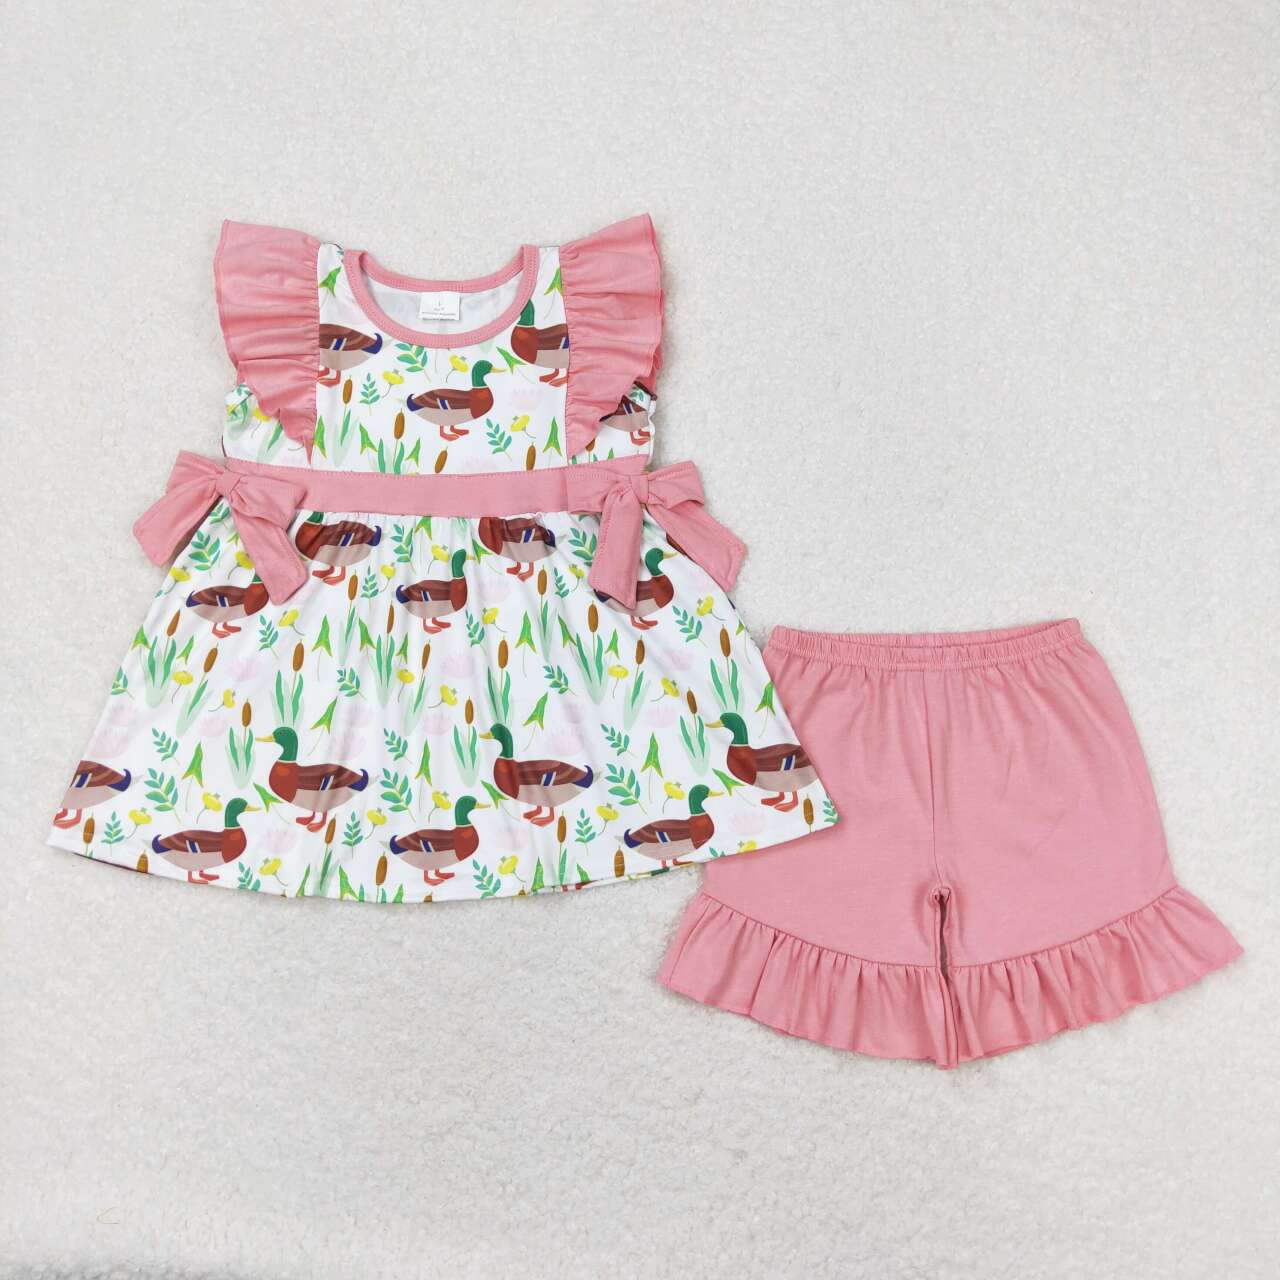 GSSO0517 Duck Tunic Top Pink Shorts Girls Summer Clothes Set